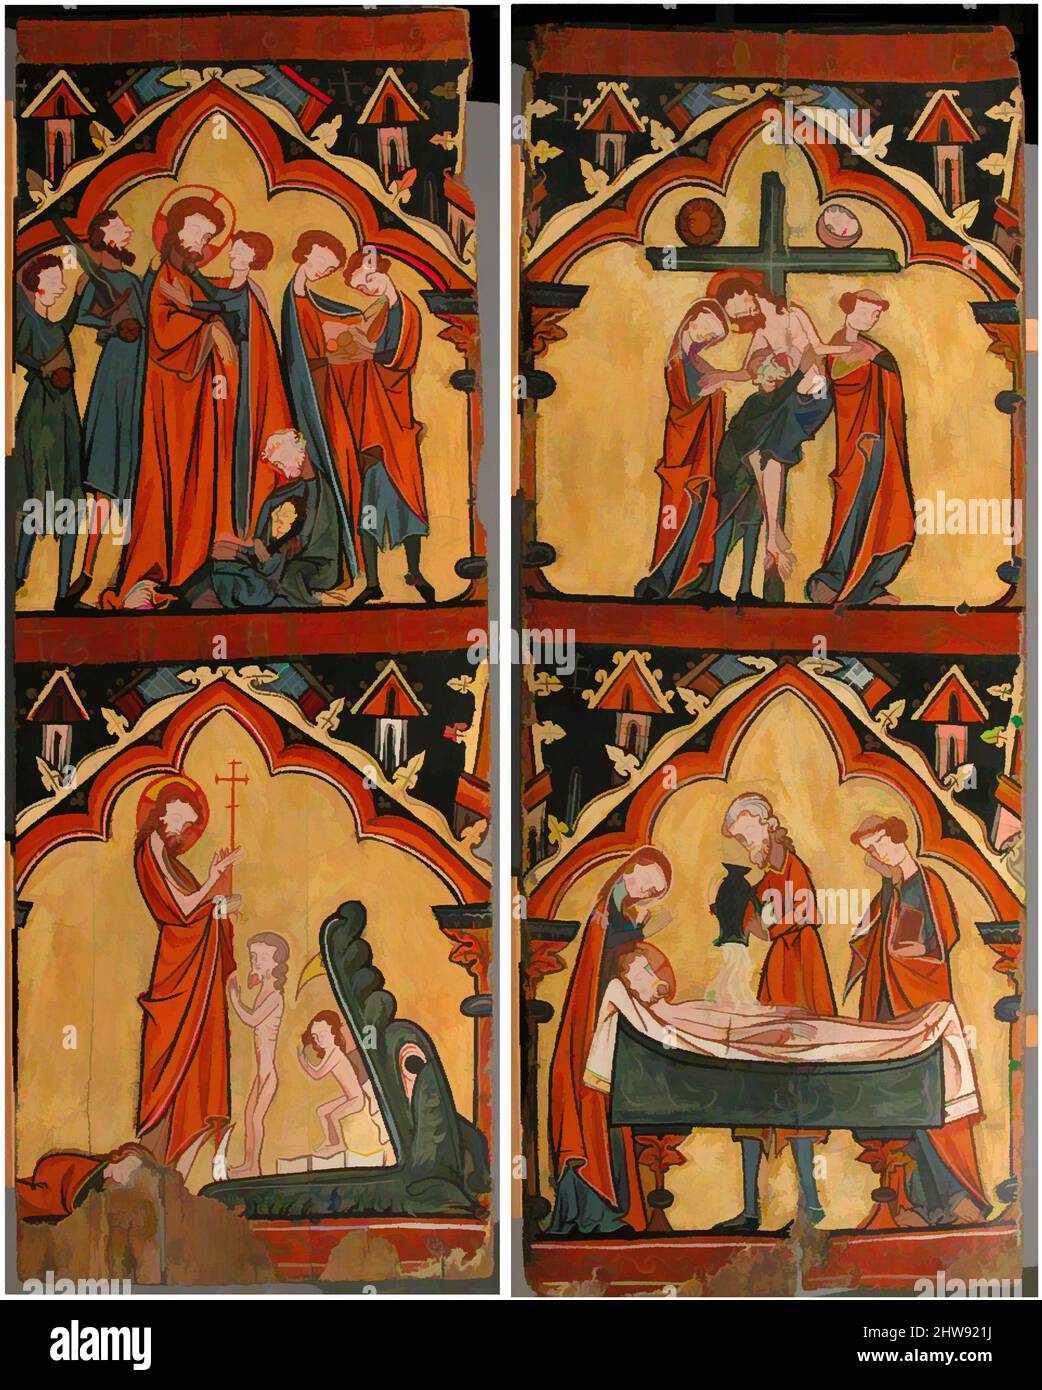 Art inspired by Scenes from the Life of Christ: Arrest of Christ, Christ in Limbo; Descent from the Cross, Preparation of Christ’s Body for His Entombment, 13th century, Spanish, Tempera on wood, Overall (a): 41 3/8 x 15 5/8 x 13/16 in. (105.1 x 39.7 x 2.1 cm), Paintings-Panels, Classic works modernized by Artotop with a splash of modernity. Shapes, color and value, eye-catching visual impact on art. Emotions through freedom of artworks in a contemporary way. A timeless message pursuing a wildly creative new direction. Artists turning to the digital medium and creating the Artotop NFT Stock Photo